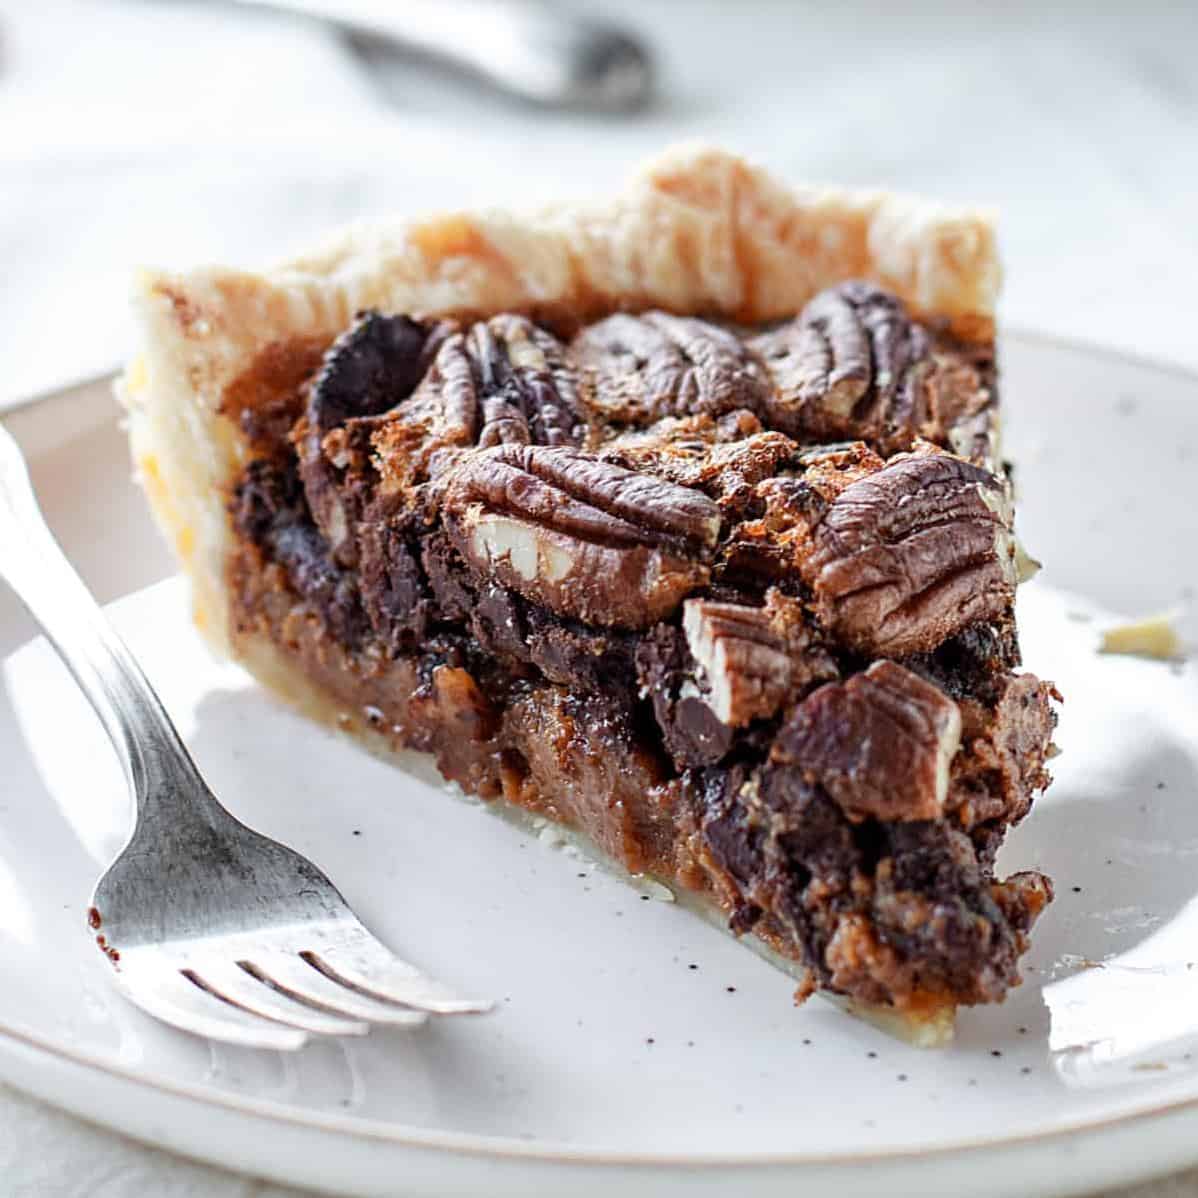  The chocolate drizzle on top of this pie takes it to the next level.